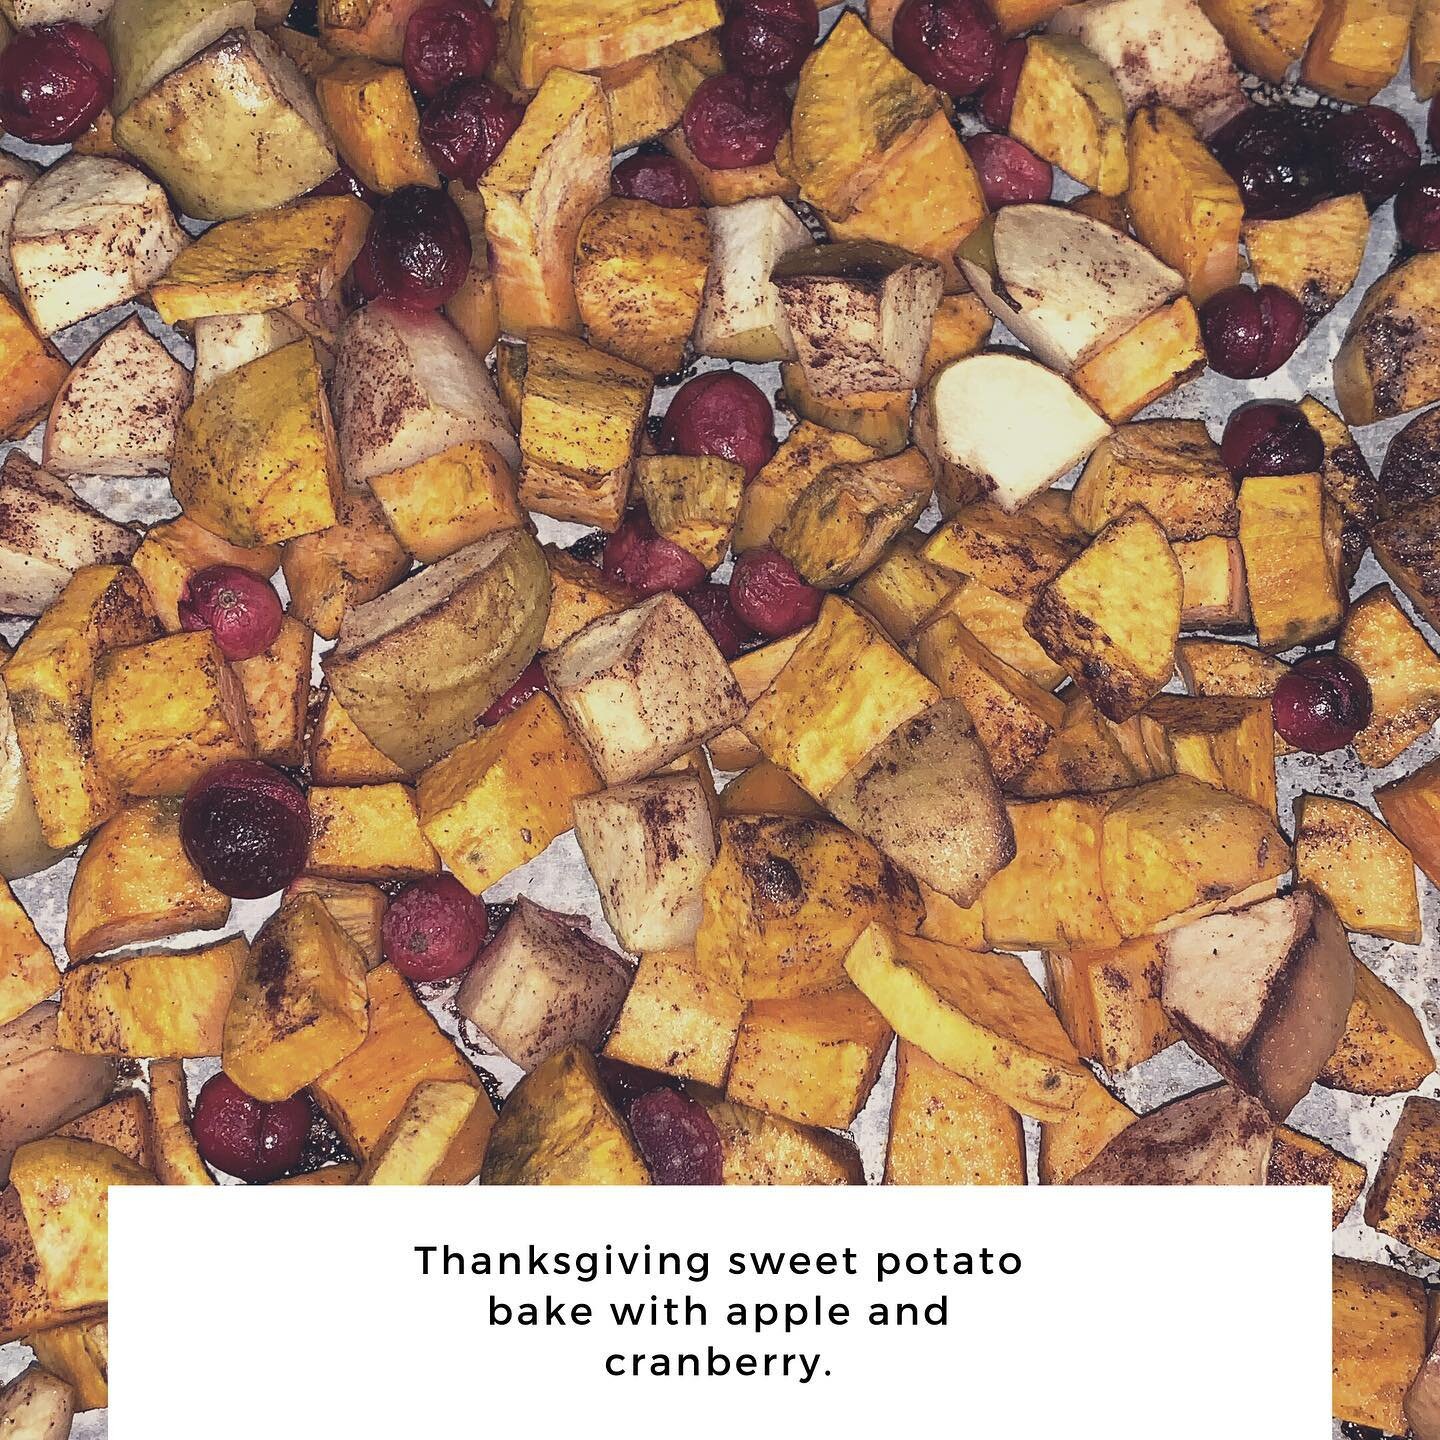 This sweet potato bake is a great addition to your holiday party! 
Ingredients:
- sweet potato&rsquo;s
- apples
- cranberries - top off with coconut oil and cinnamon *bake at 375 for one hour* 
#nourishandliftnutrition #nutritioncoaching #thanksgivin